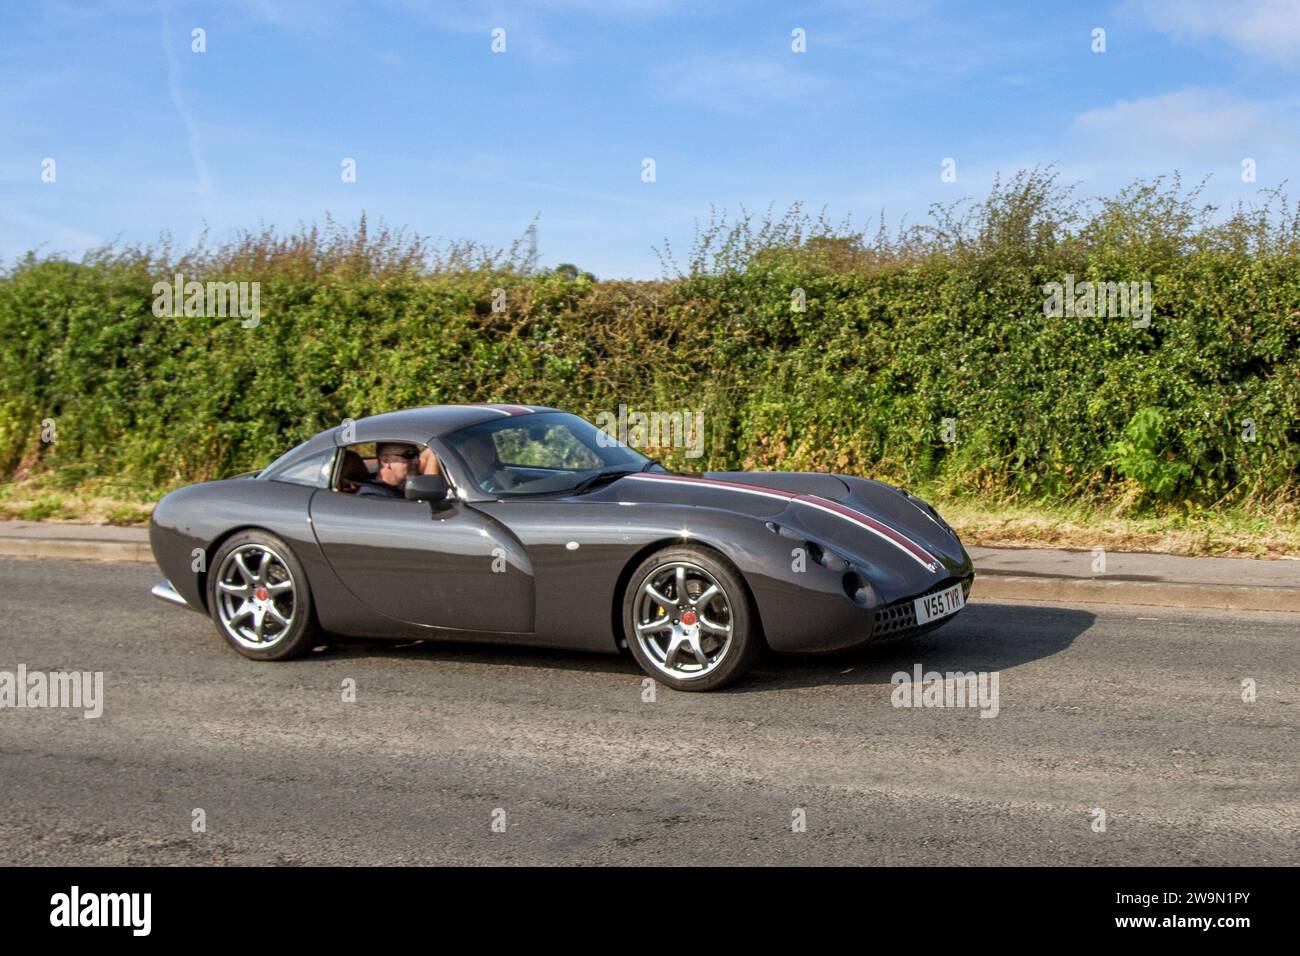 2001 Grey TVR Tuscan Car Roadster Petrol 3996 cc hardtop; Vintage restored classic specialist motors vehicle restoration, automobile collectors, yesteryear motoring enthusiasts and historic veteran cars travelling in Cheshire, UK Stock Photo